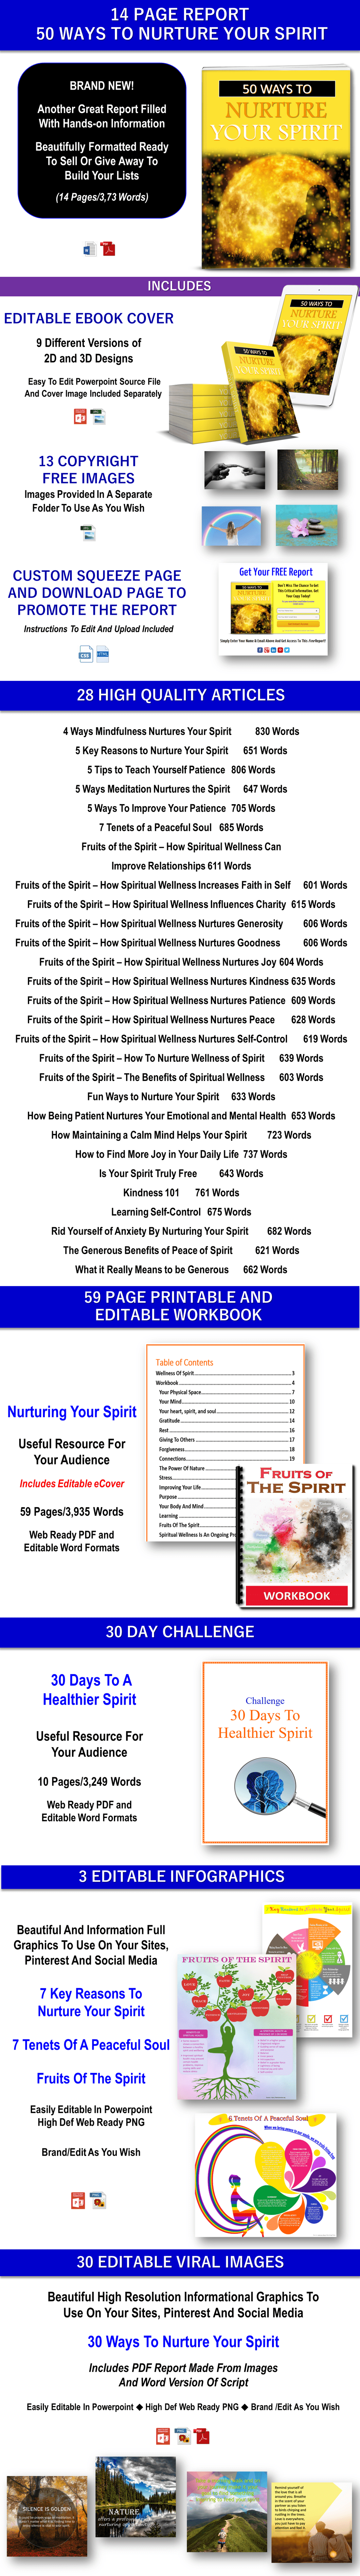 Fruits Of The Spirit - Spirit Health Content with PLR Rights